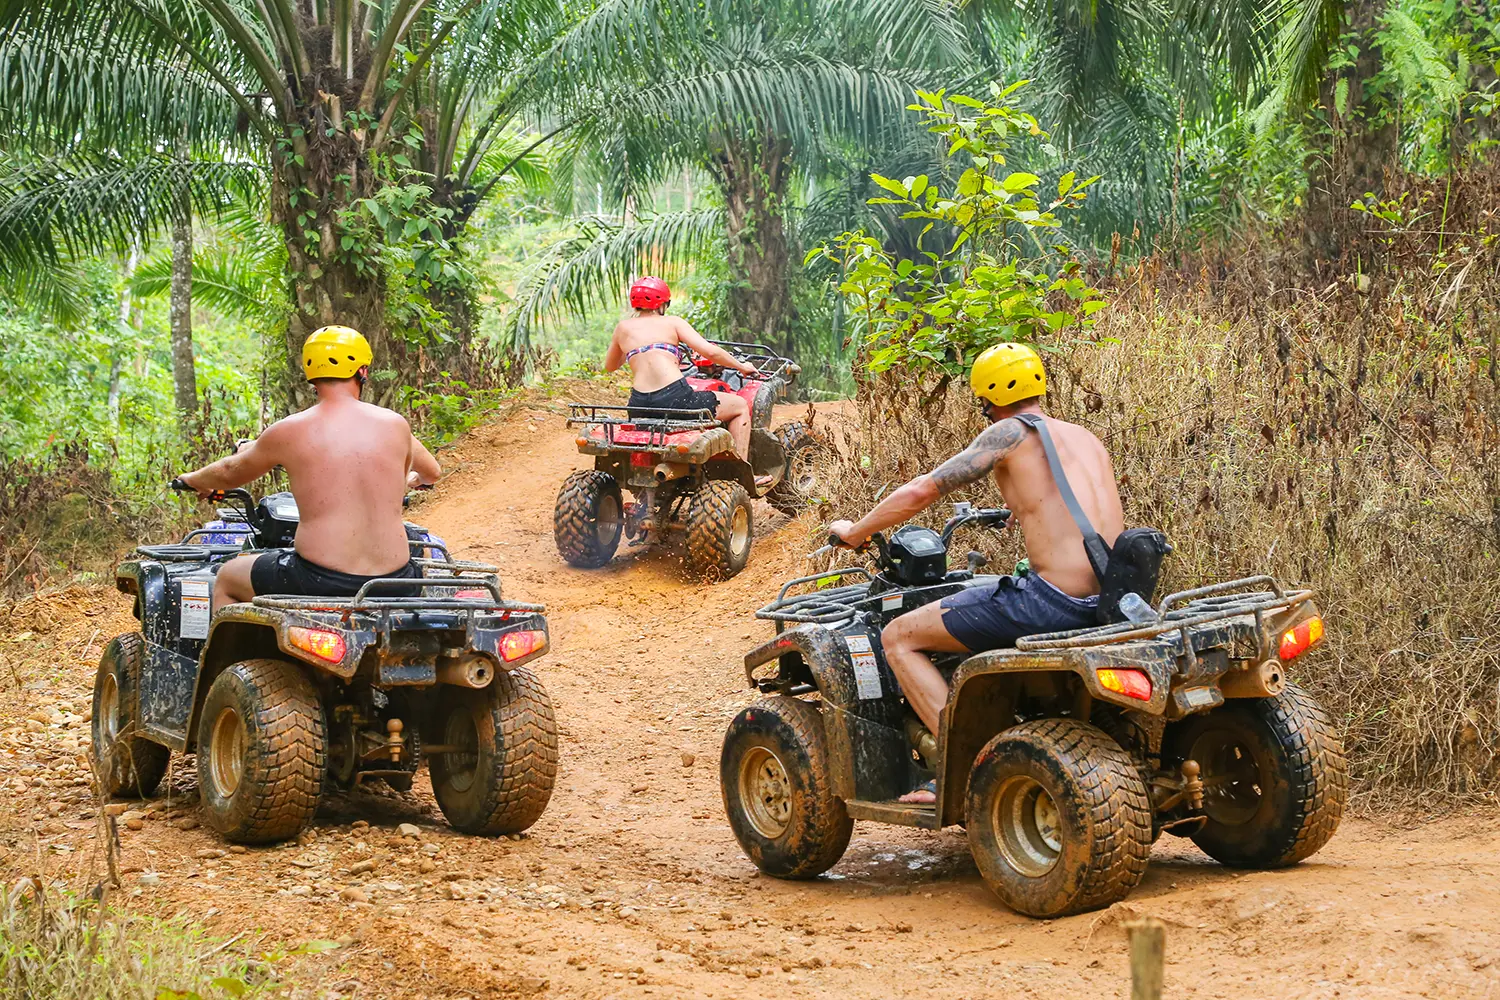 Tourists riding ATVs in Thailand